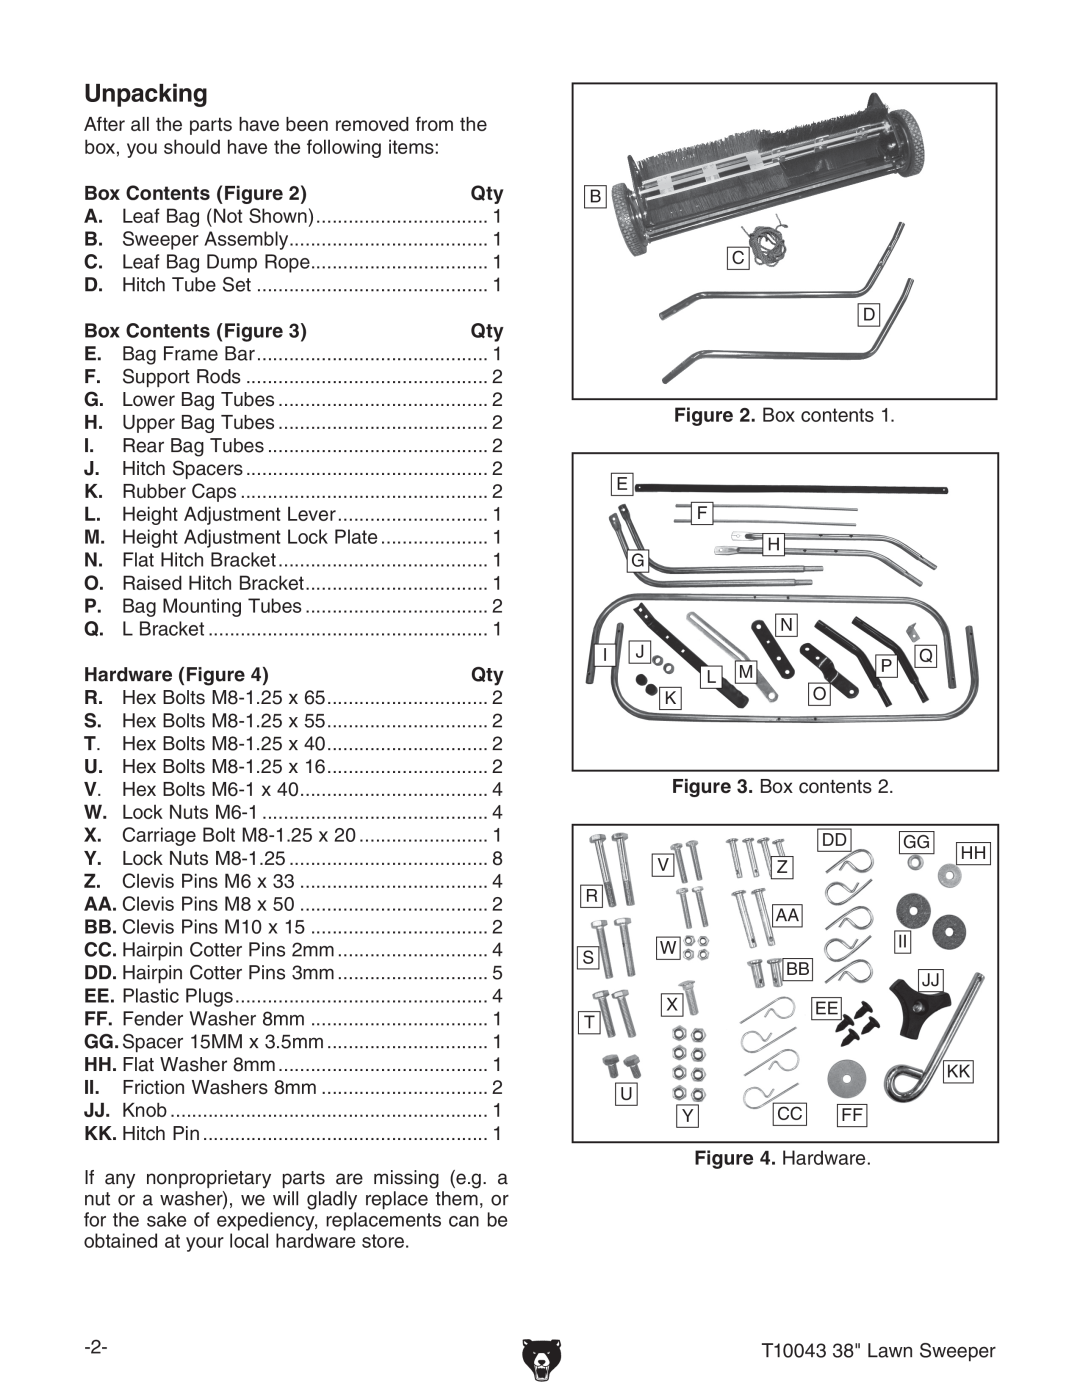 Grizzly T10043 instruction sheet Unpacking 